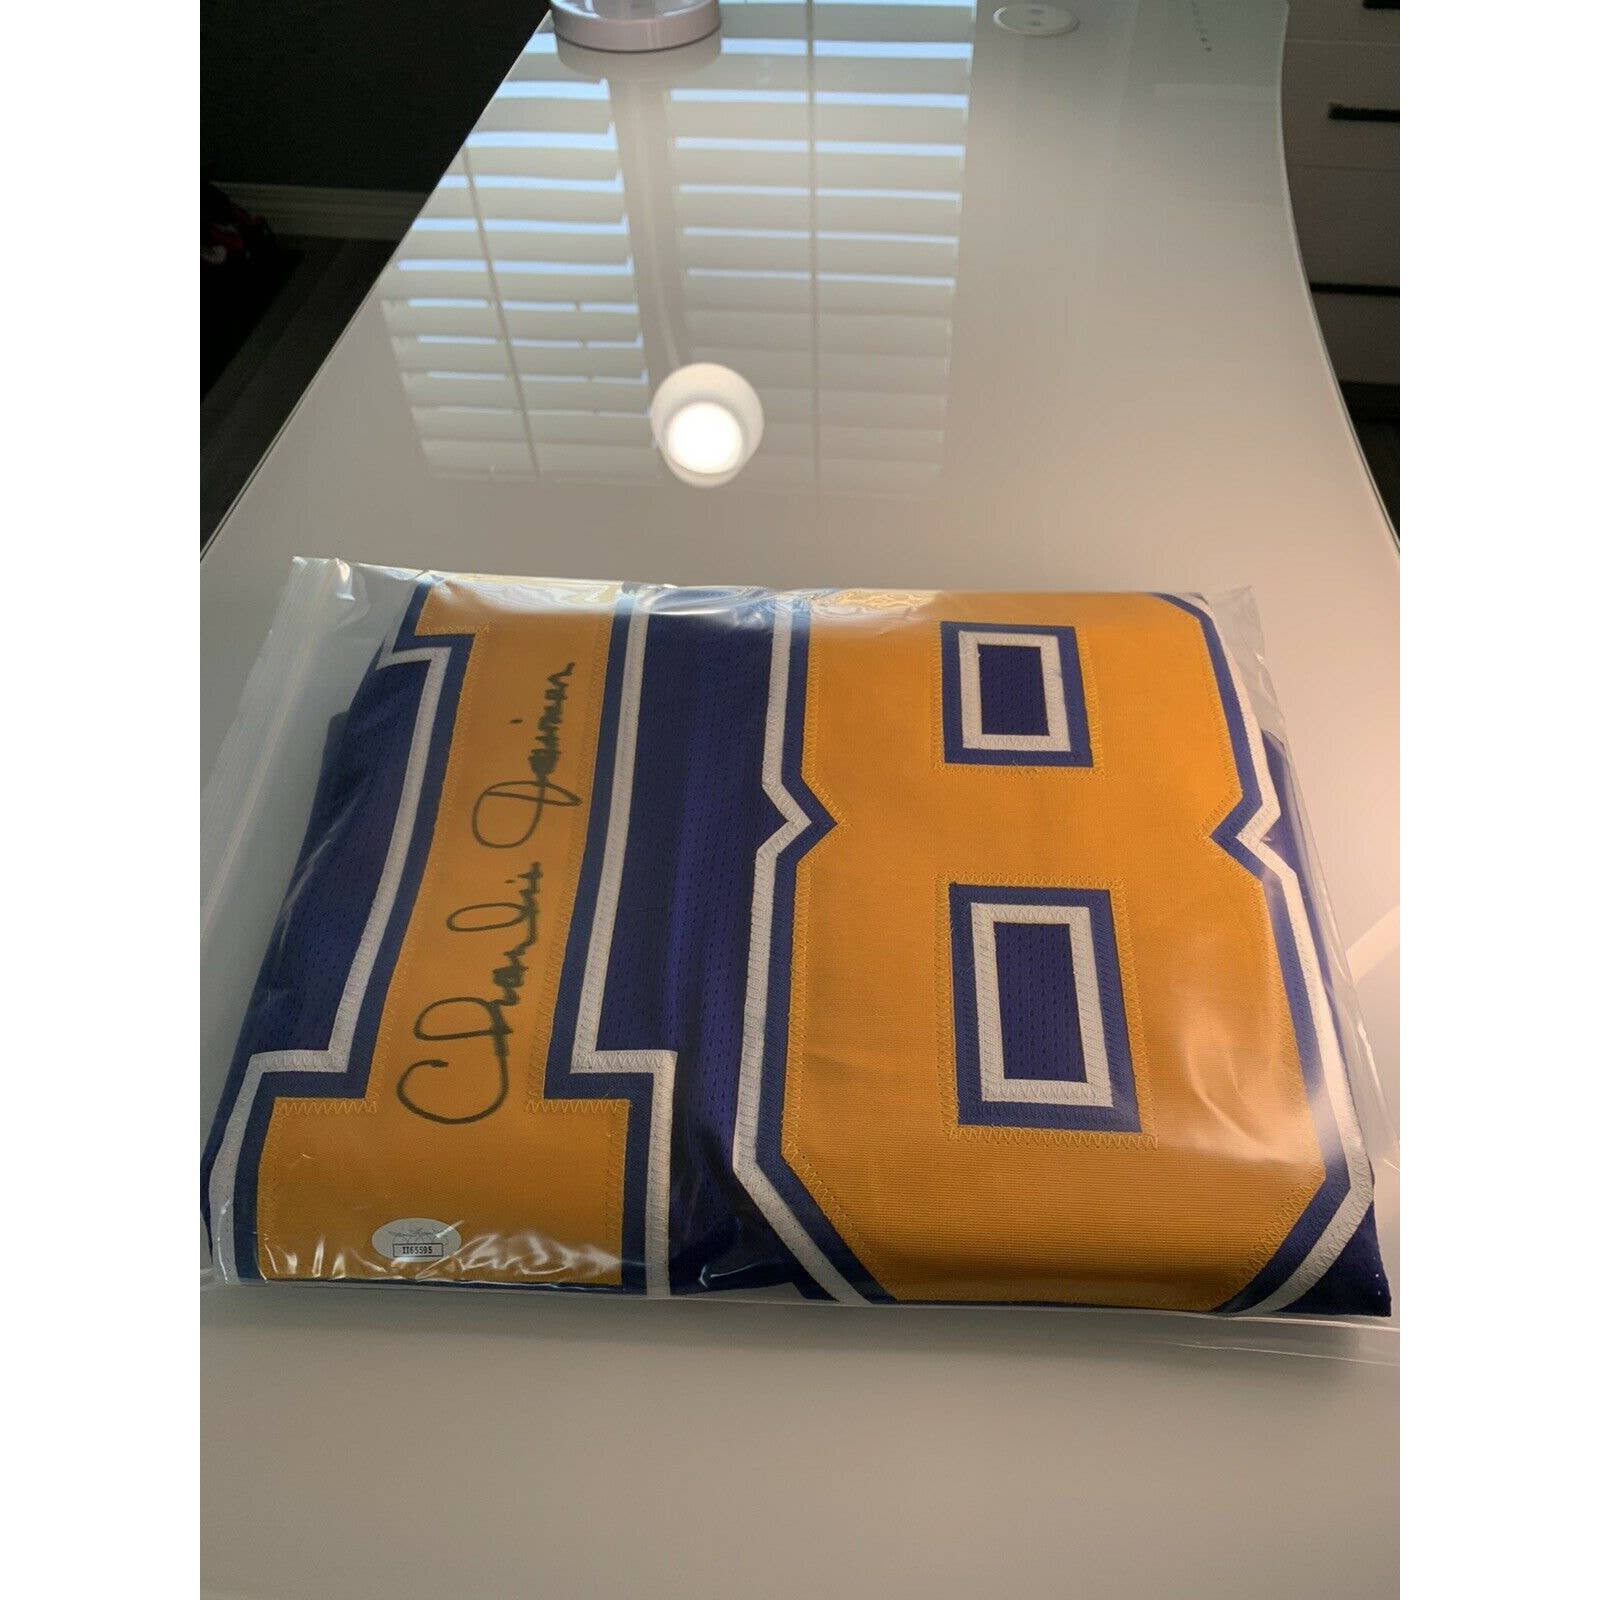 Charlie Joiner Autographed/Signed Jersey JSA San Diego Chargers Los Angeles - TreasuresEvolved